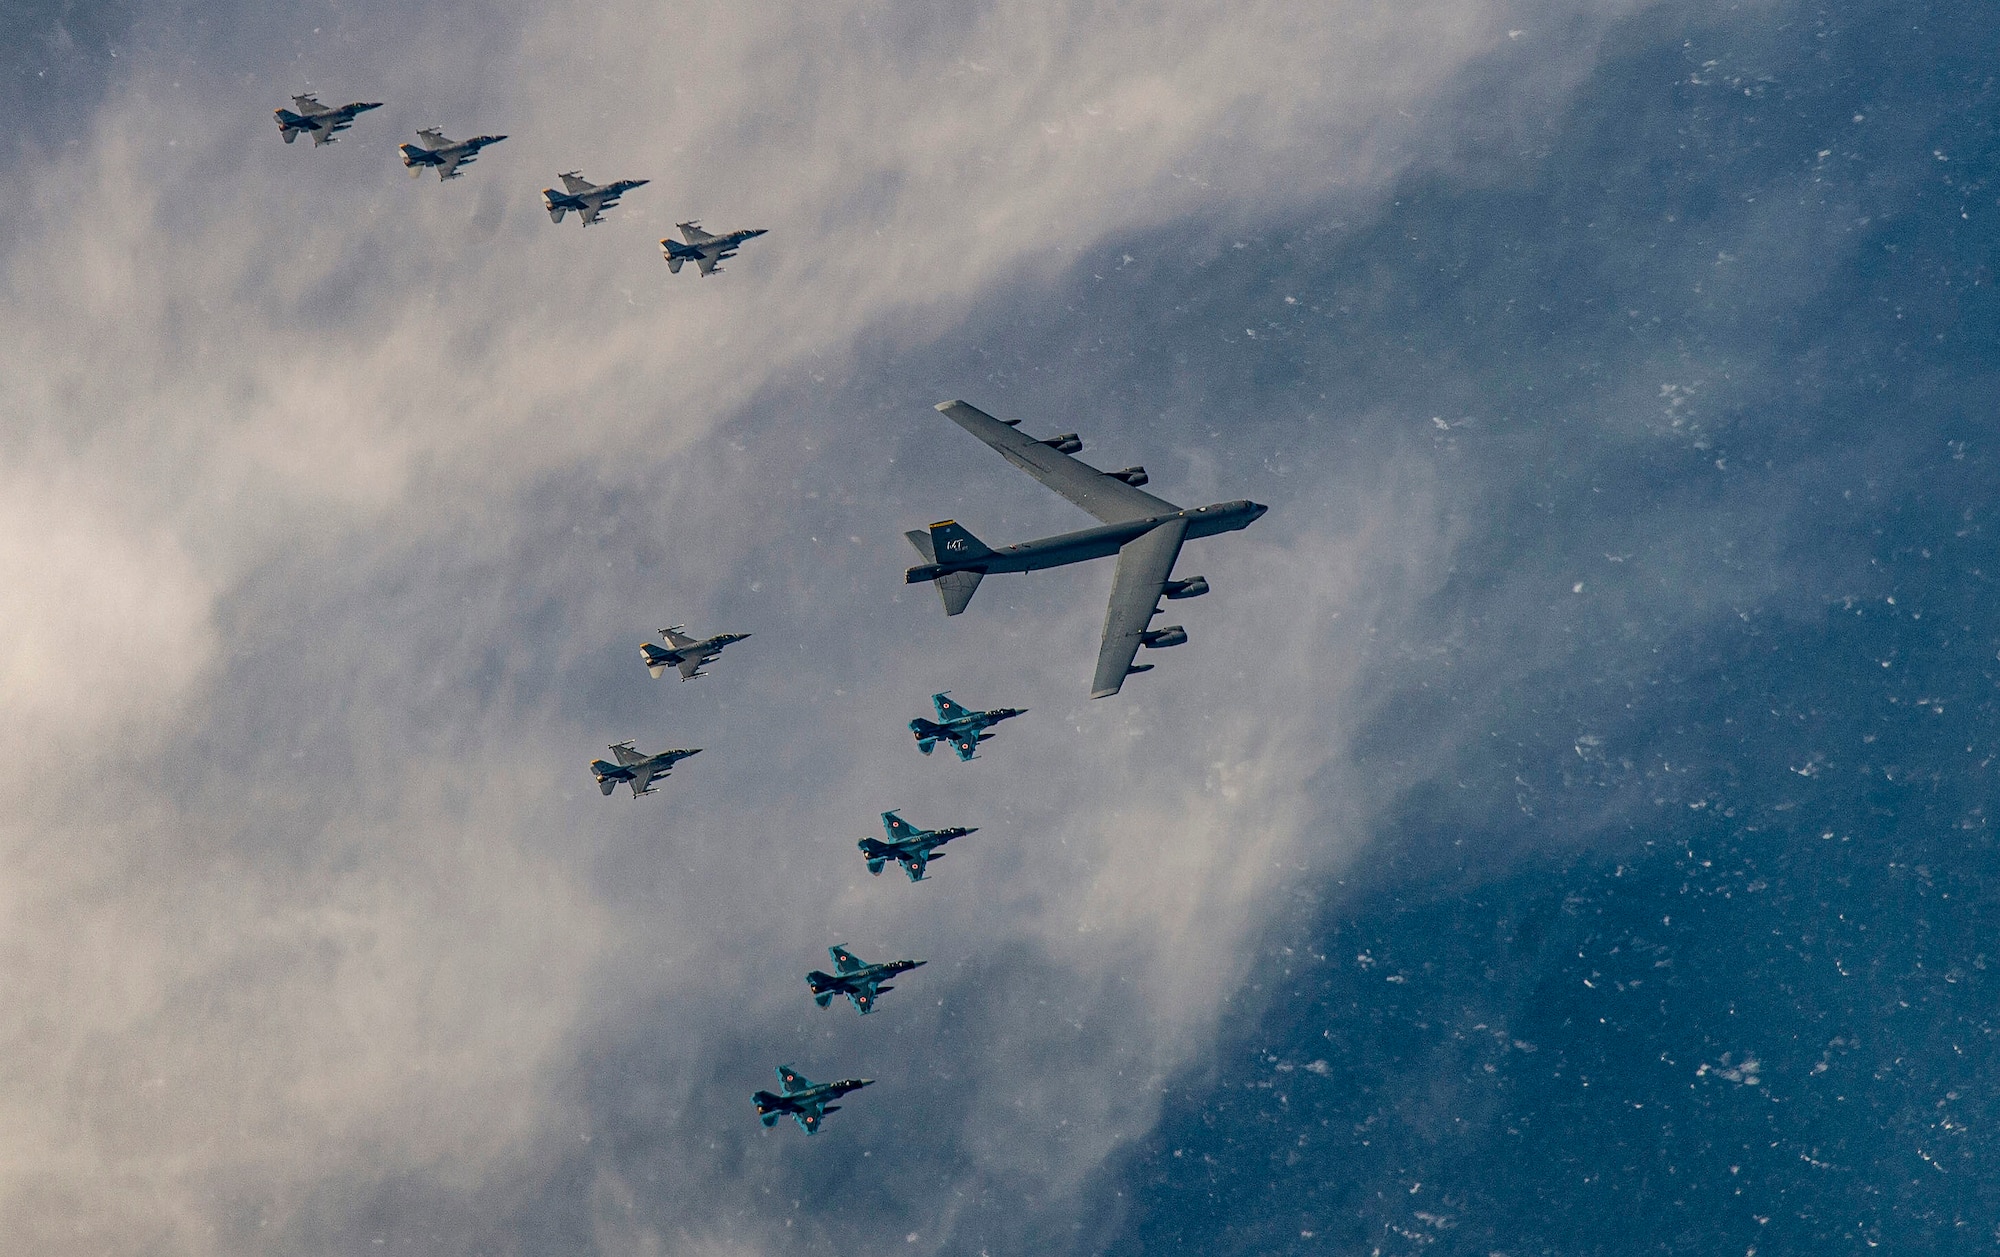 A U.S. Air Force B-52H Stratofortress from Minot Air Force Base, North Dakota, and six F-16 Fighting Falcons from Misawa Air Base, Japan, conduct bilateral joint training with four Japan Air Self-Defense Force F-2's off the coast of Northern Japan, Feb. 4, 2020. U.S. Strategic Command’s bomber forces regularly conduct combined theater security cooperation engagements with allies and partners, demonstrating U.S. capability to command, control and conduct bomber missions around the world. (U.S. Air Force photo by Staff Sgt. Melanie A. Bulow-Gonterman)